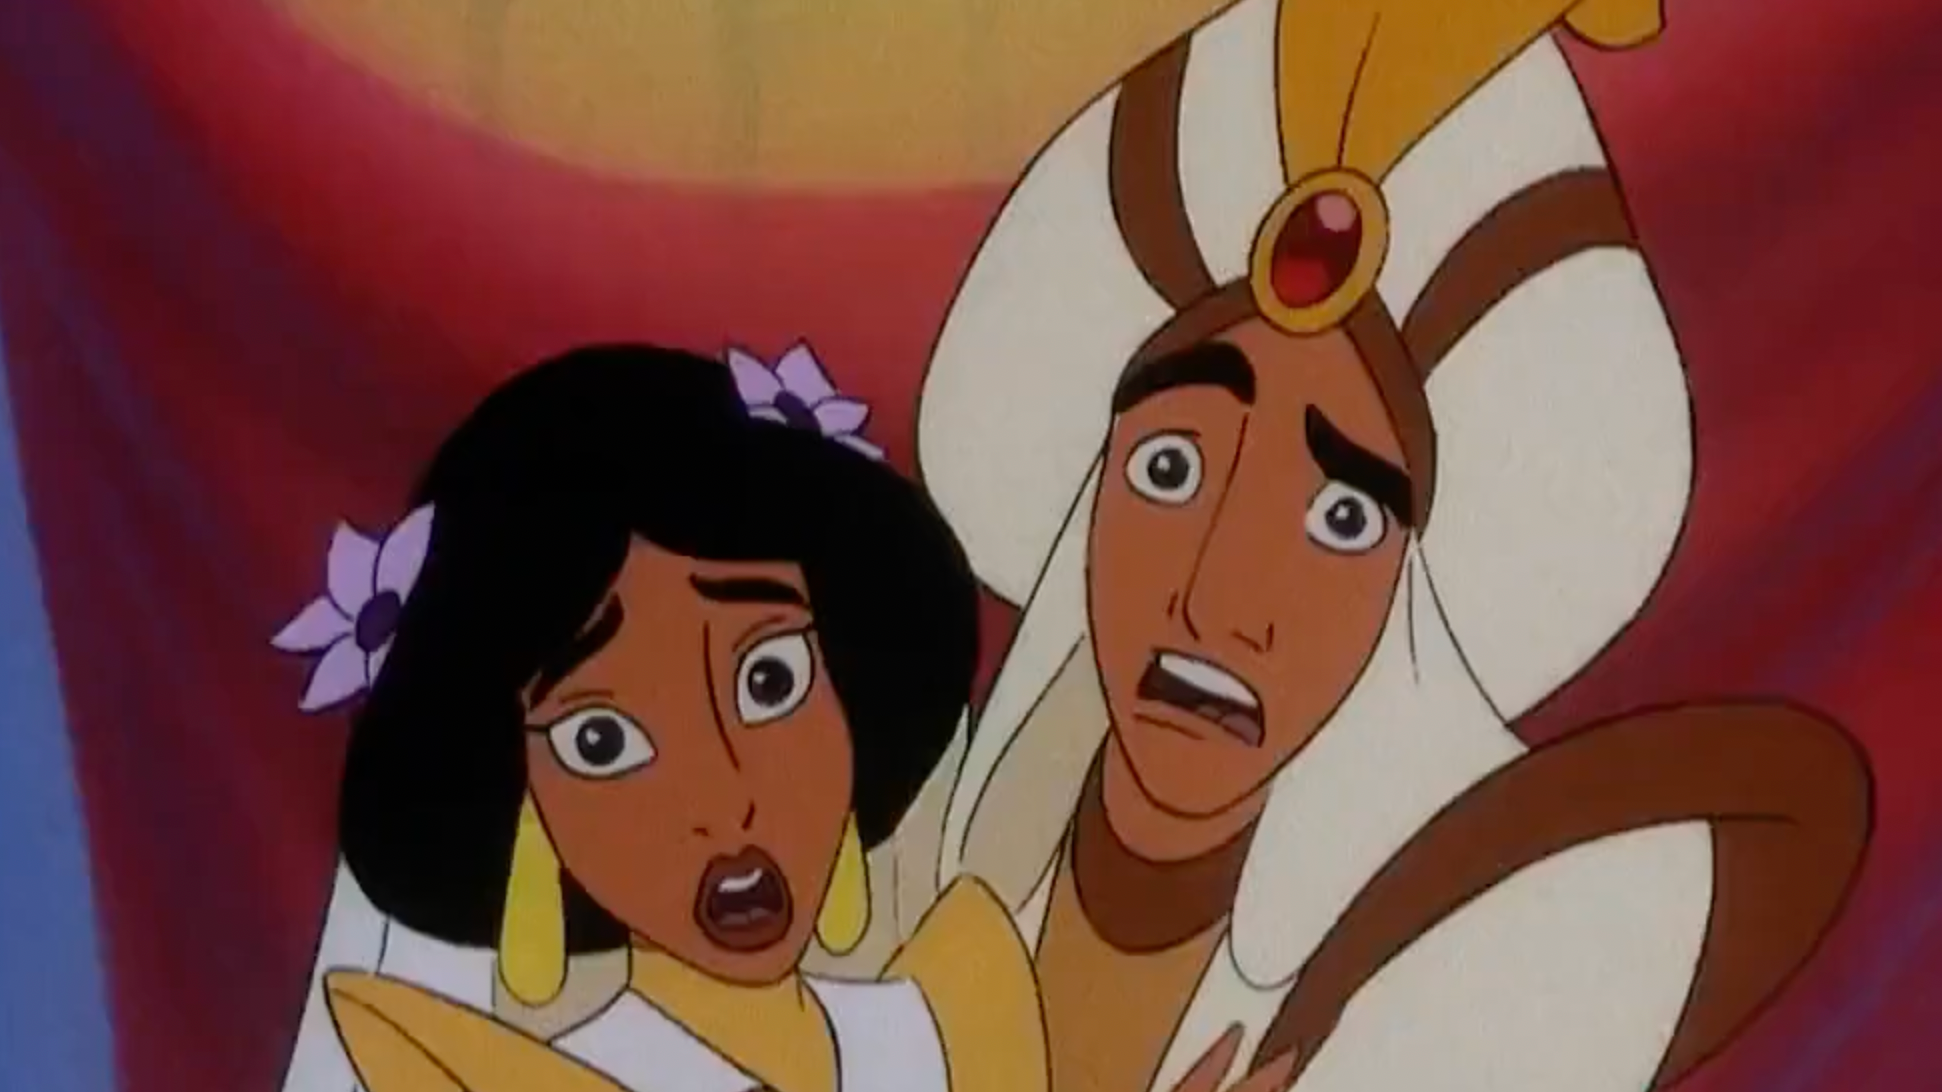 Aladdin Is Not Full of Dirty Jokes, and Other Disney Myths Busted